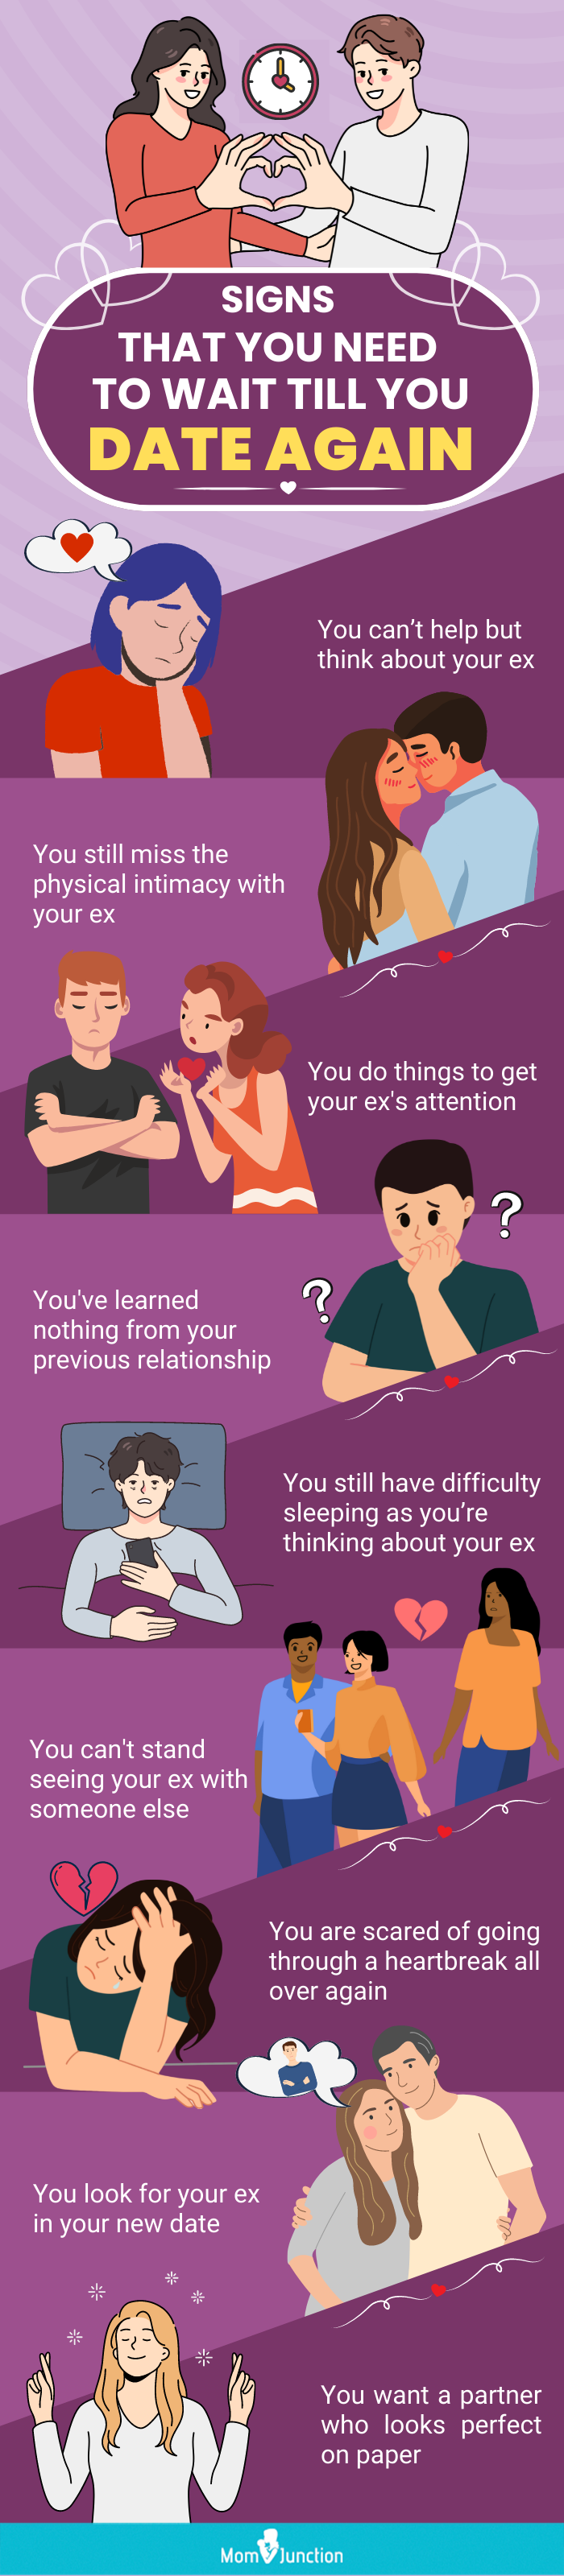 signs that you need to wait till you date again [infographic]